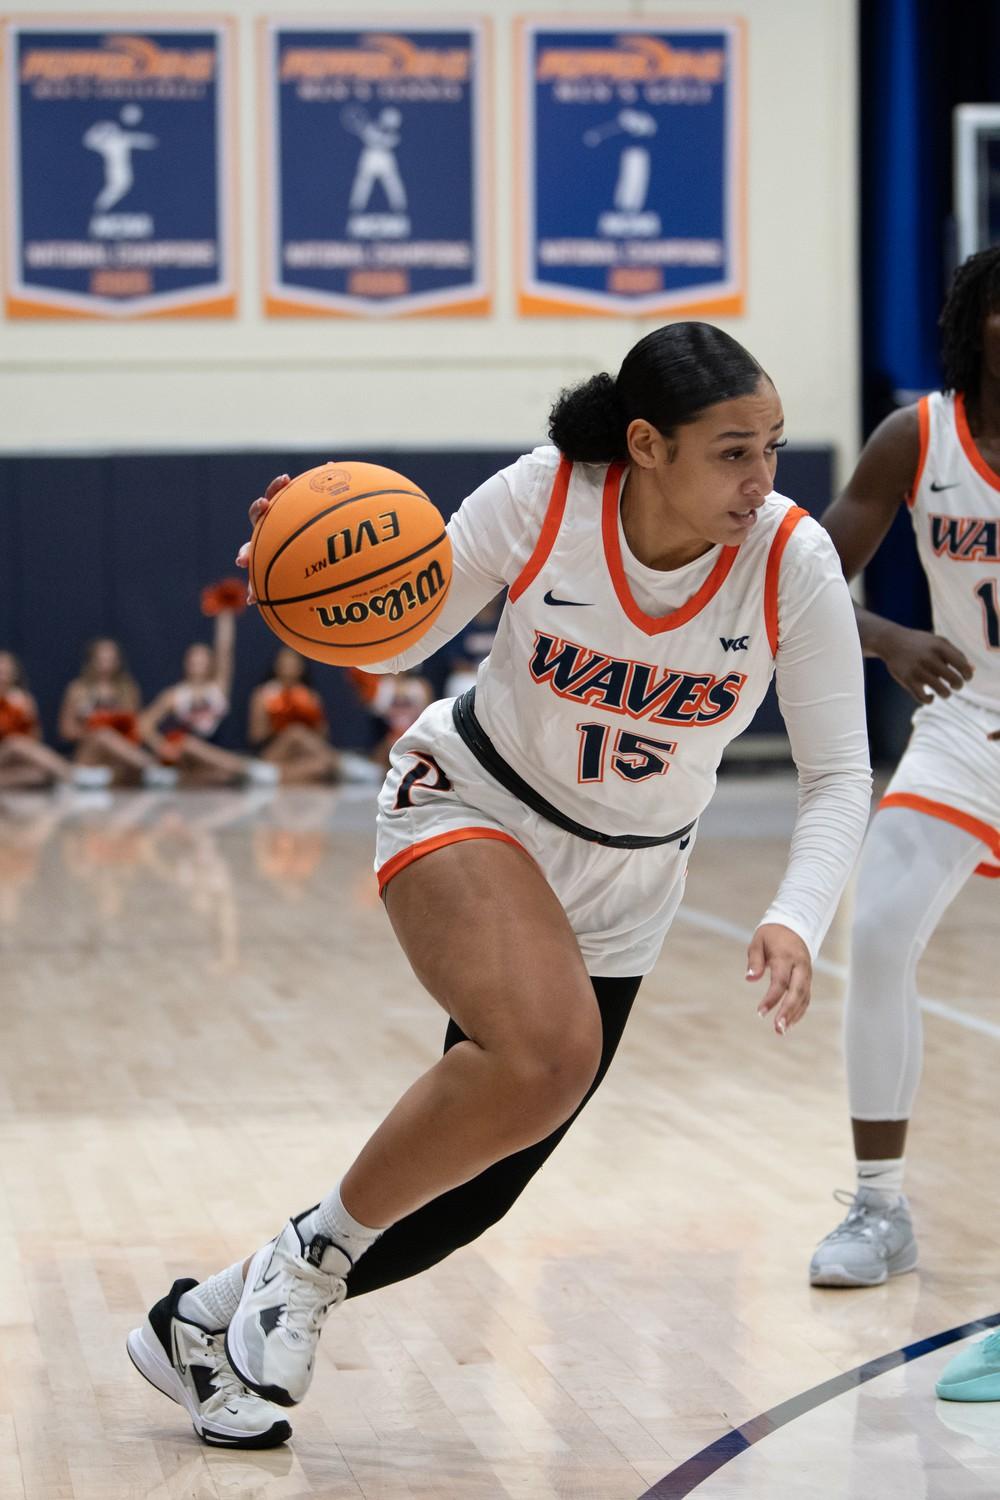 Graduate student guard Myra Gordon building up to drive toward the net against UC Irvine on Nov. 7 at Firestone Fieldhouse. Gordon not only led the team in points, but she also led the team in steals with five.